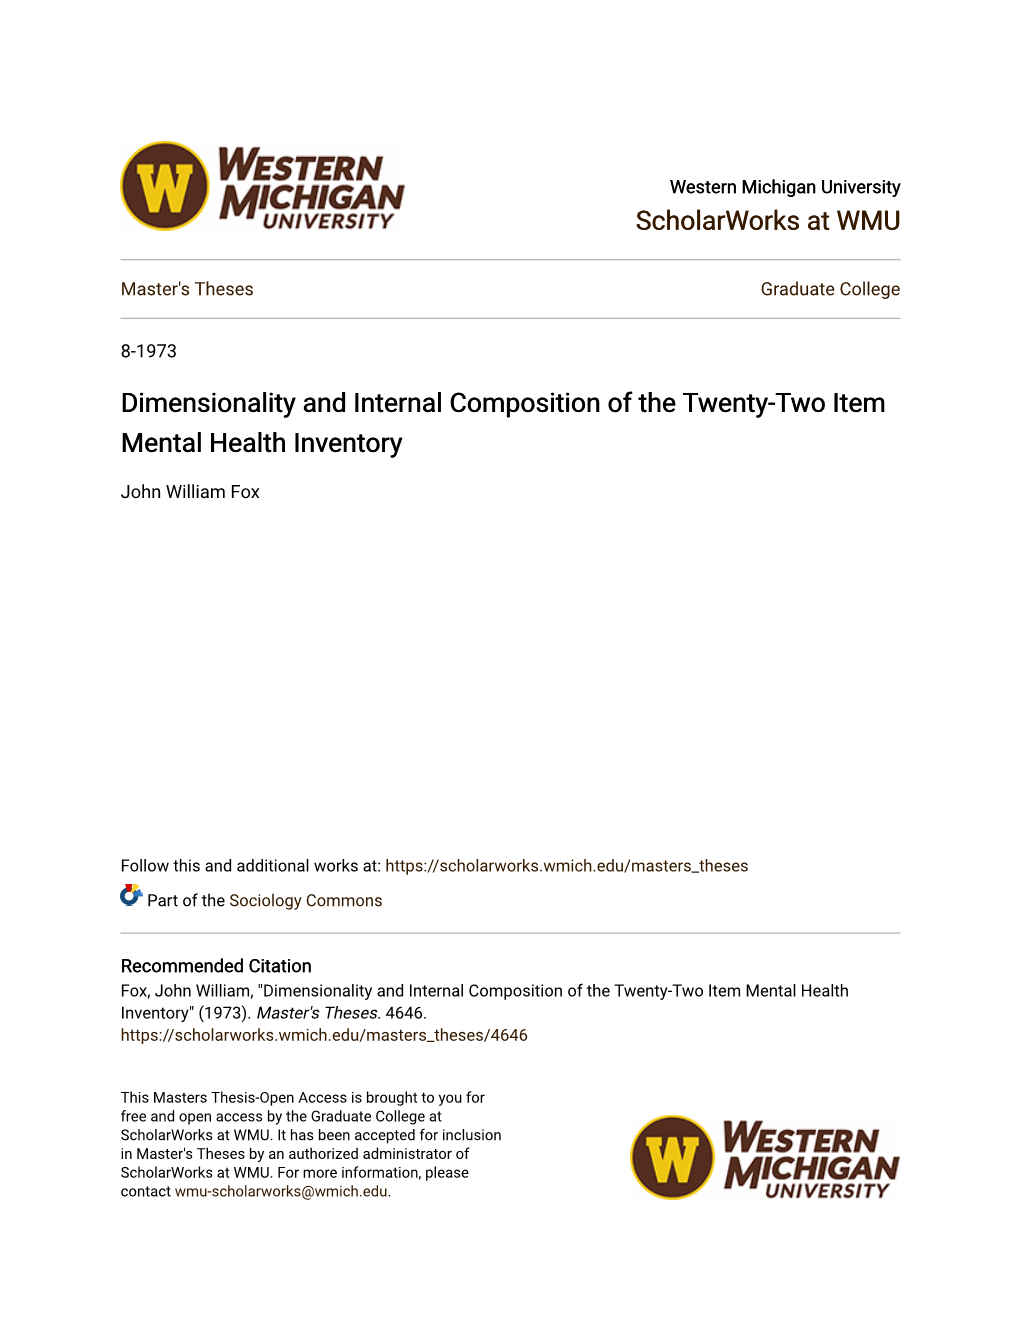 Dimensionality and Internal Composition of the Twenty-Two Item Mental Health Inventory